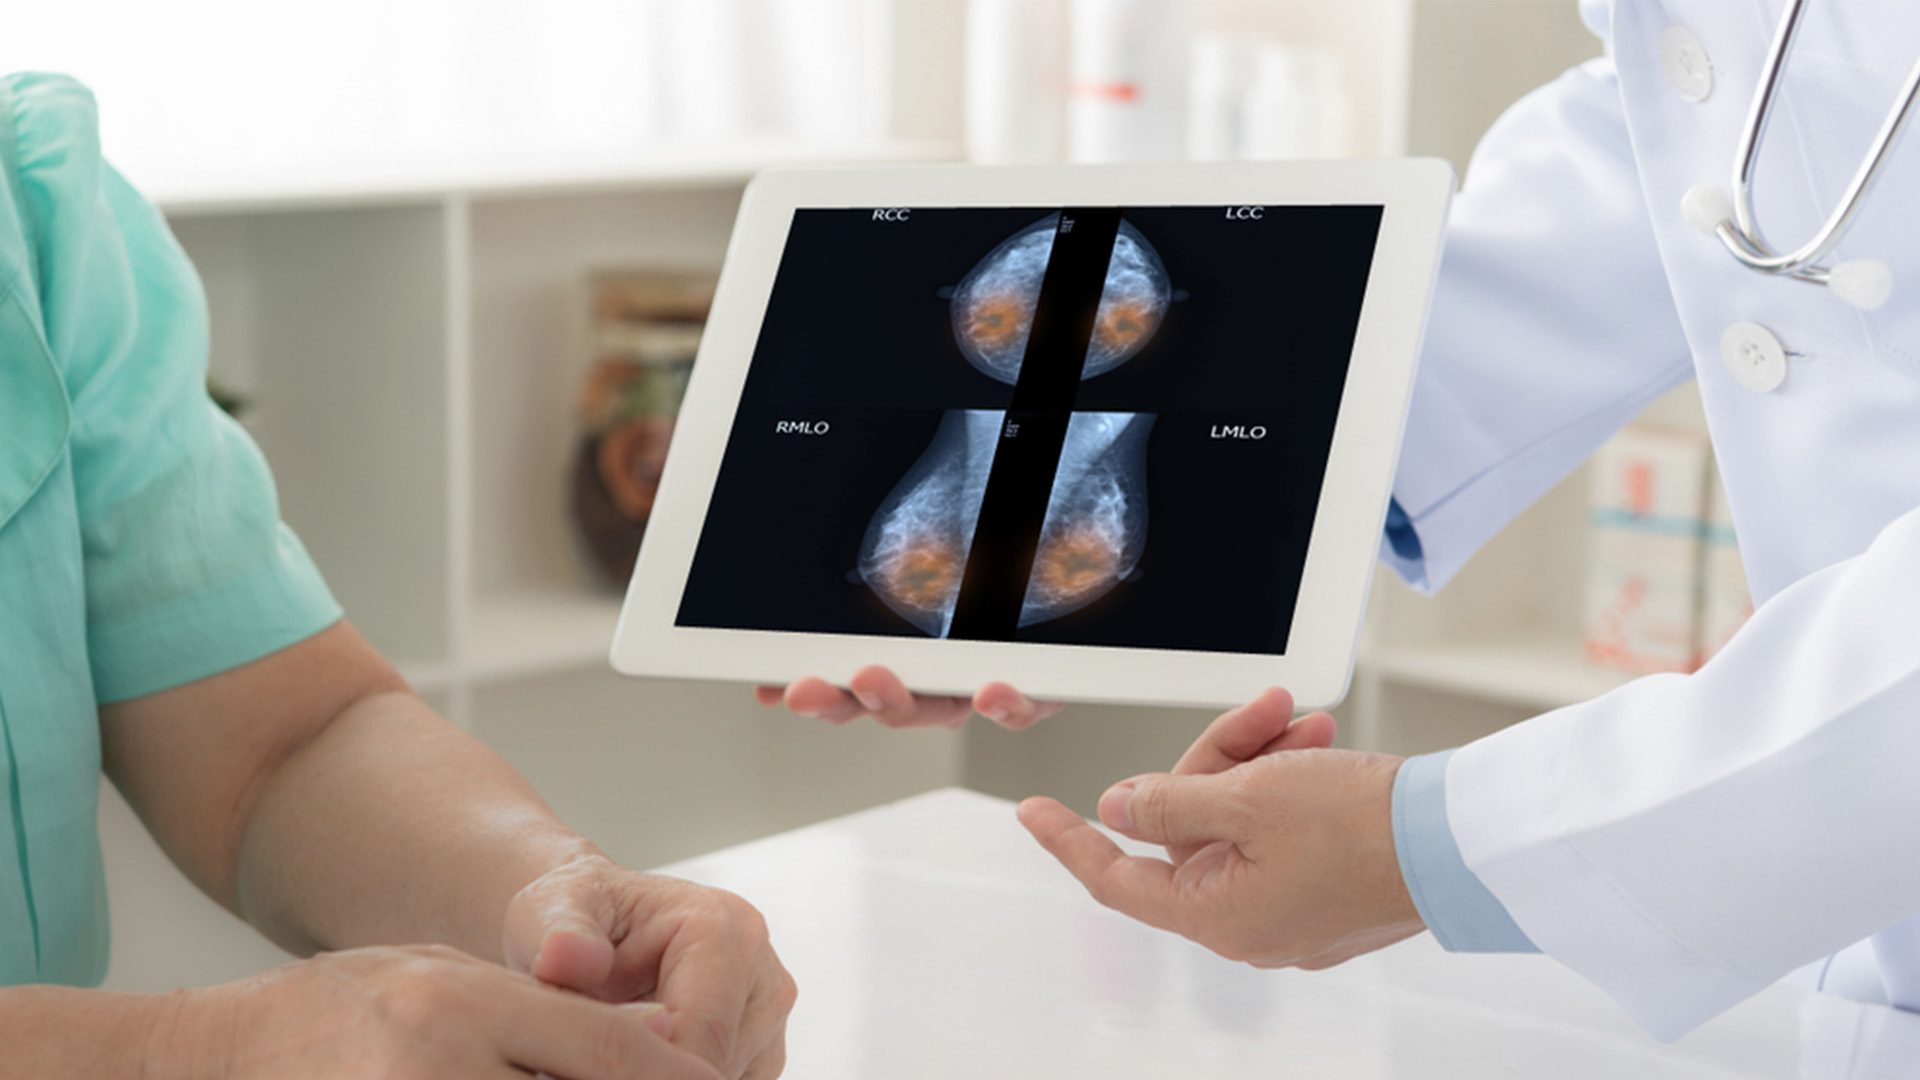 New Study Uses AI to Detect Breast Cancer